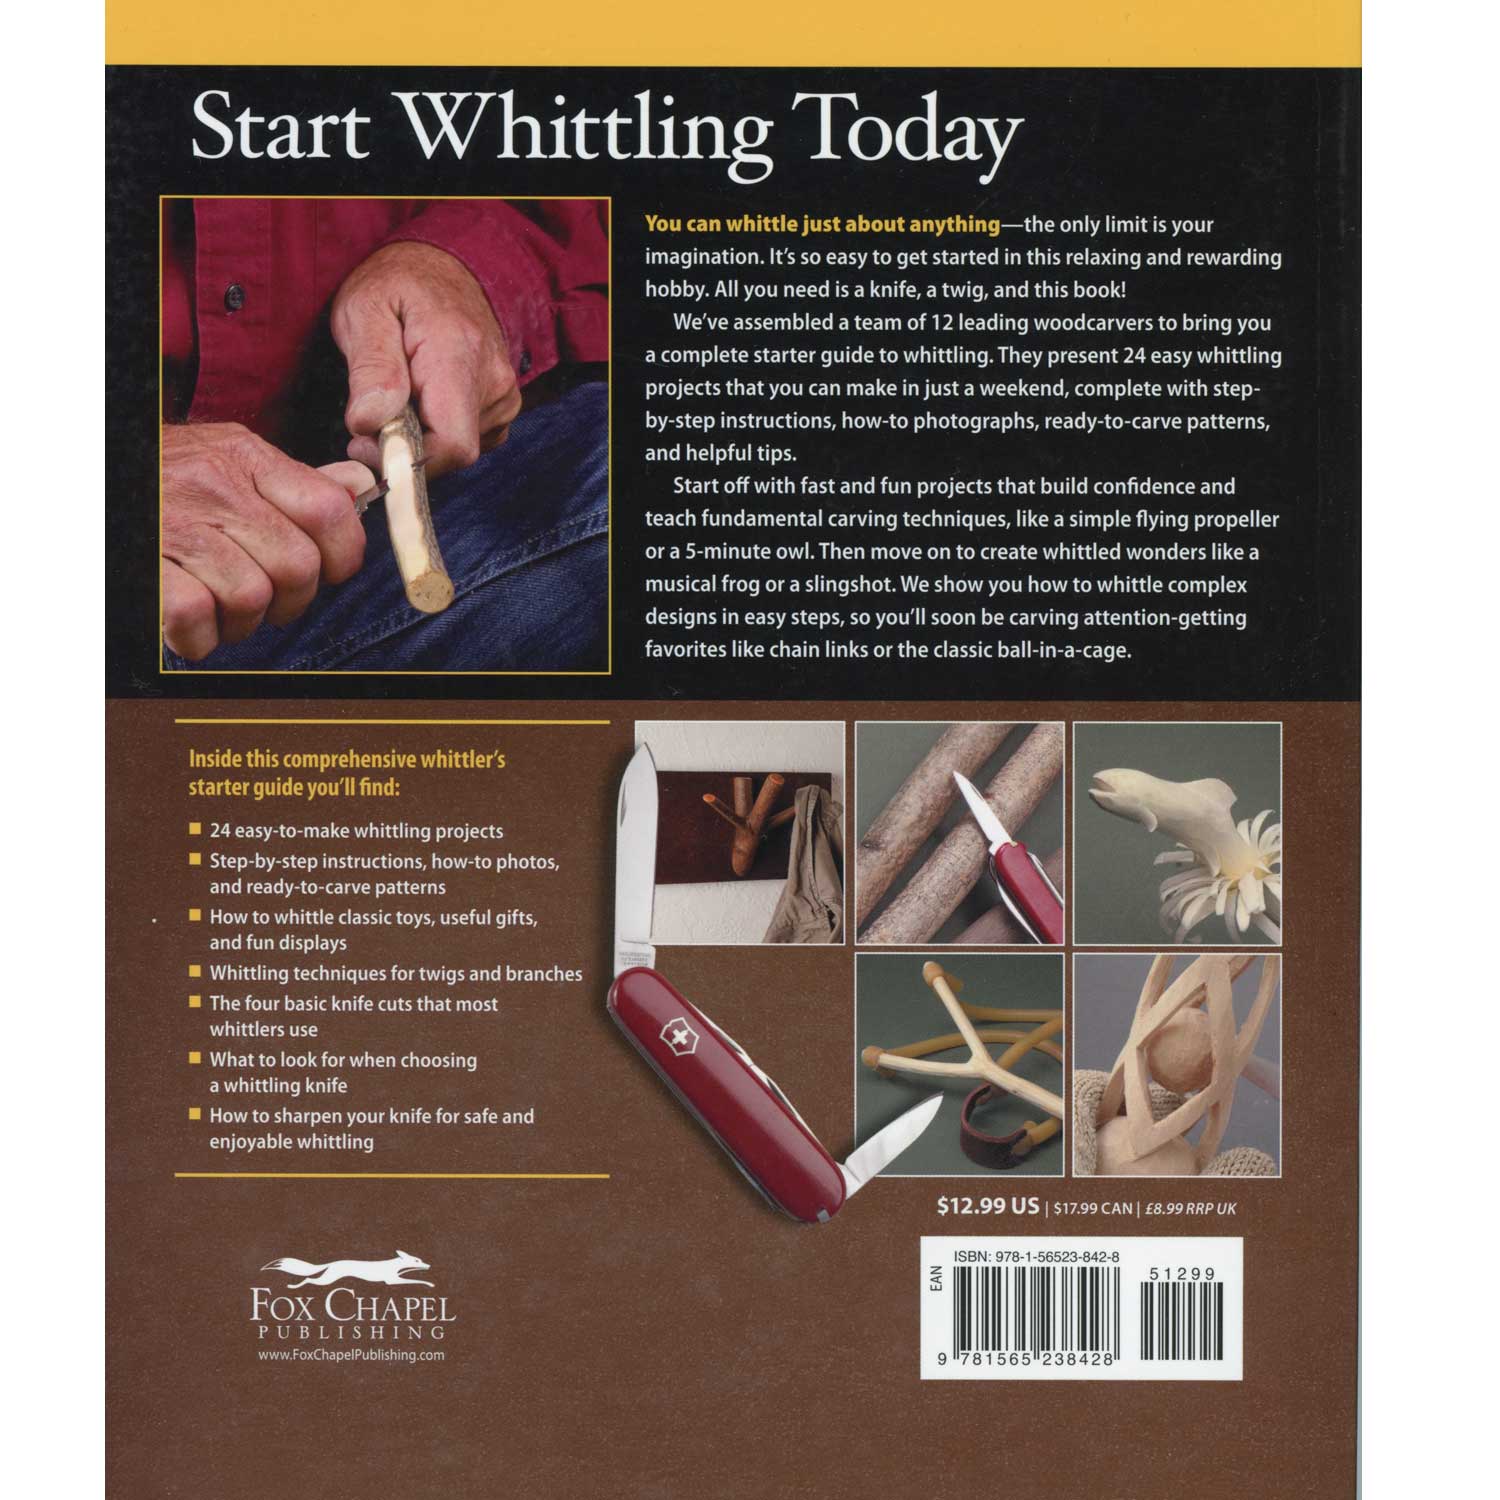 Complete Starter Guide to Whittling: 24 Easy Projects You Can Make in a Weekend [Book]